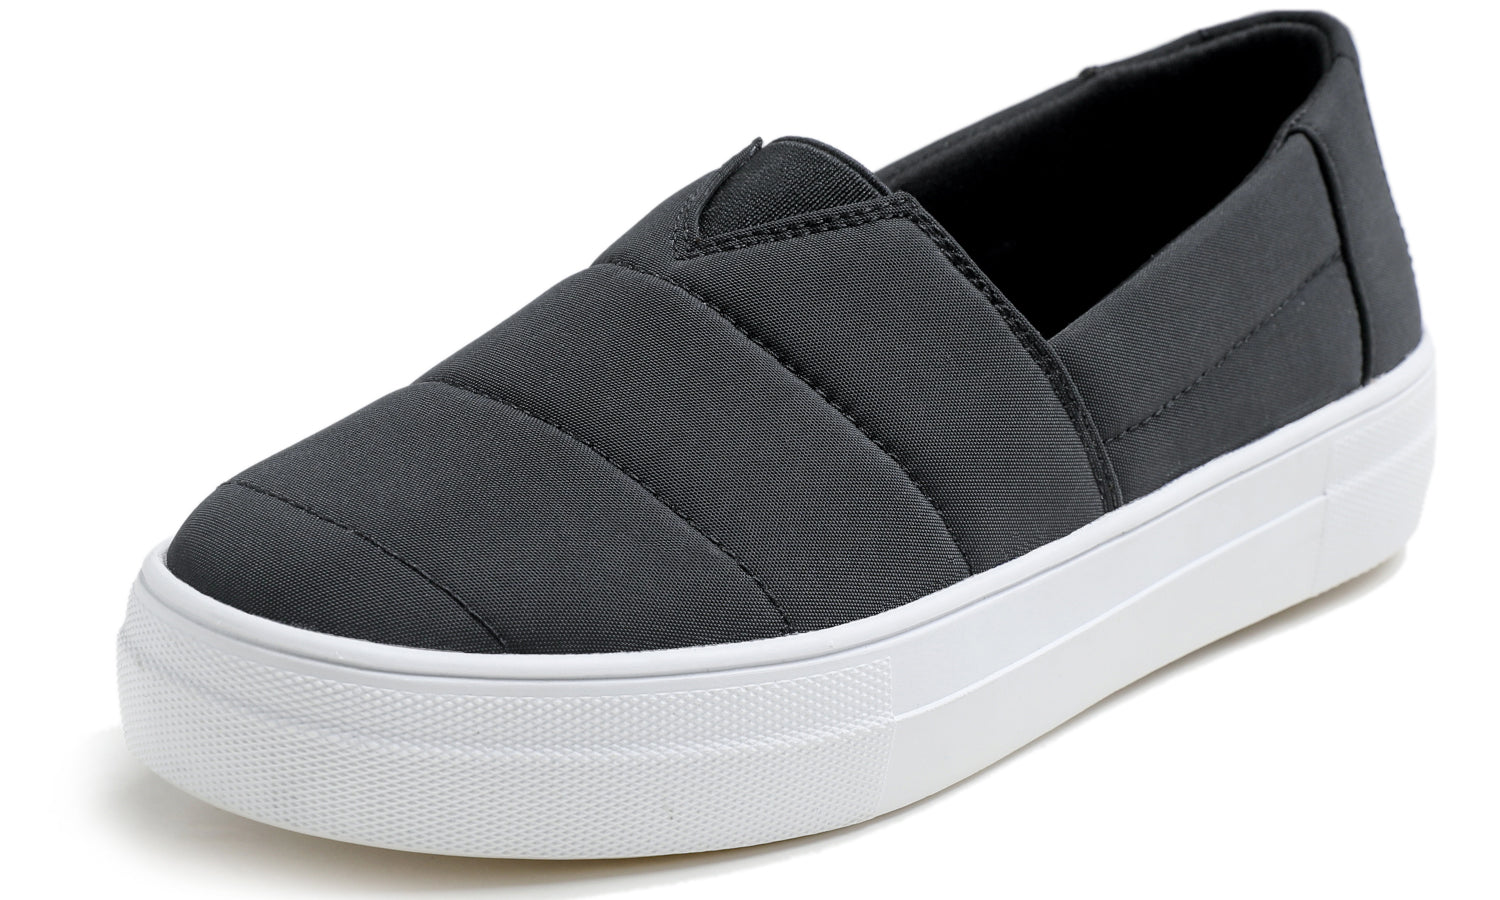 Feversole Women's Casual Slip On Sneaker Comfort Cupsole Loafer Flats Black Puffy Textile